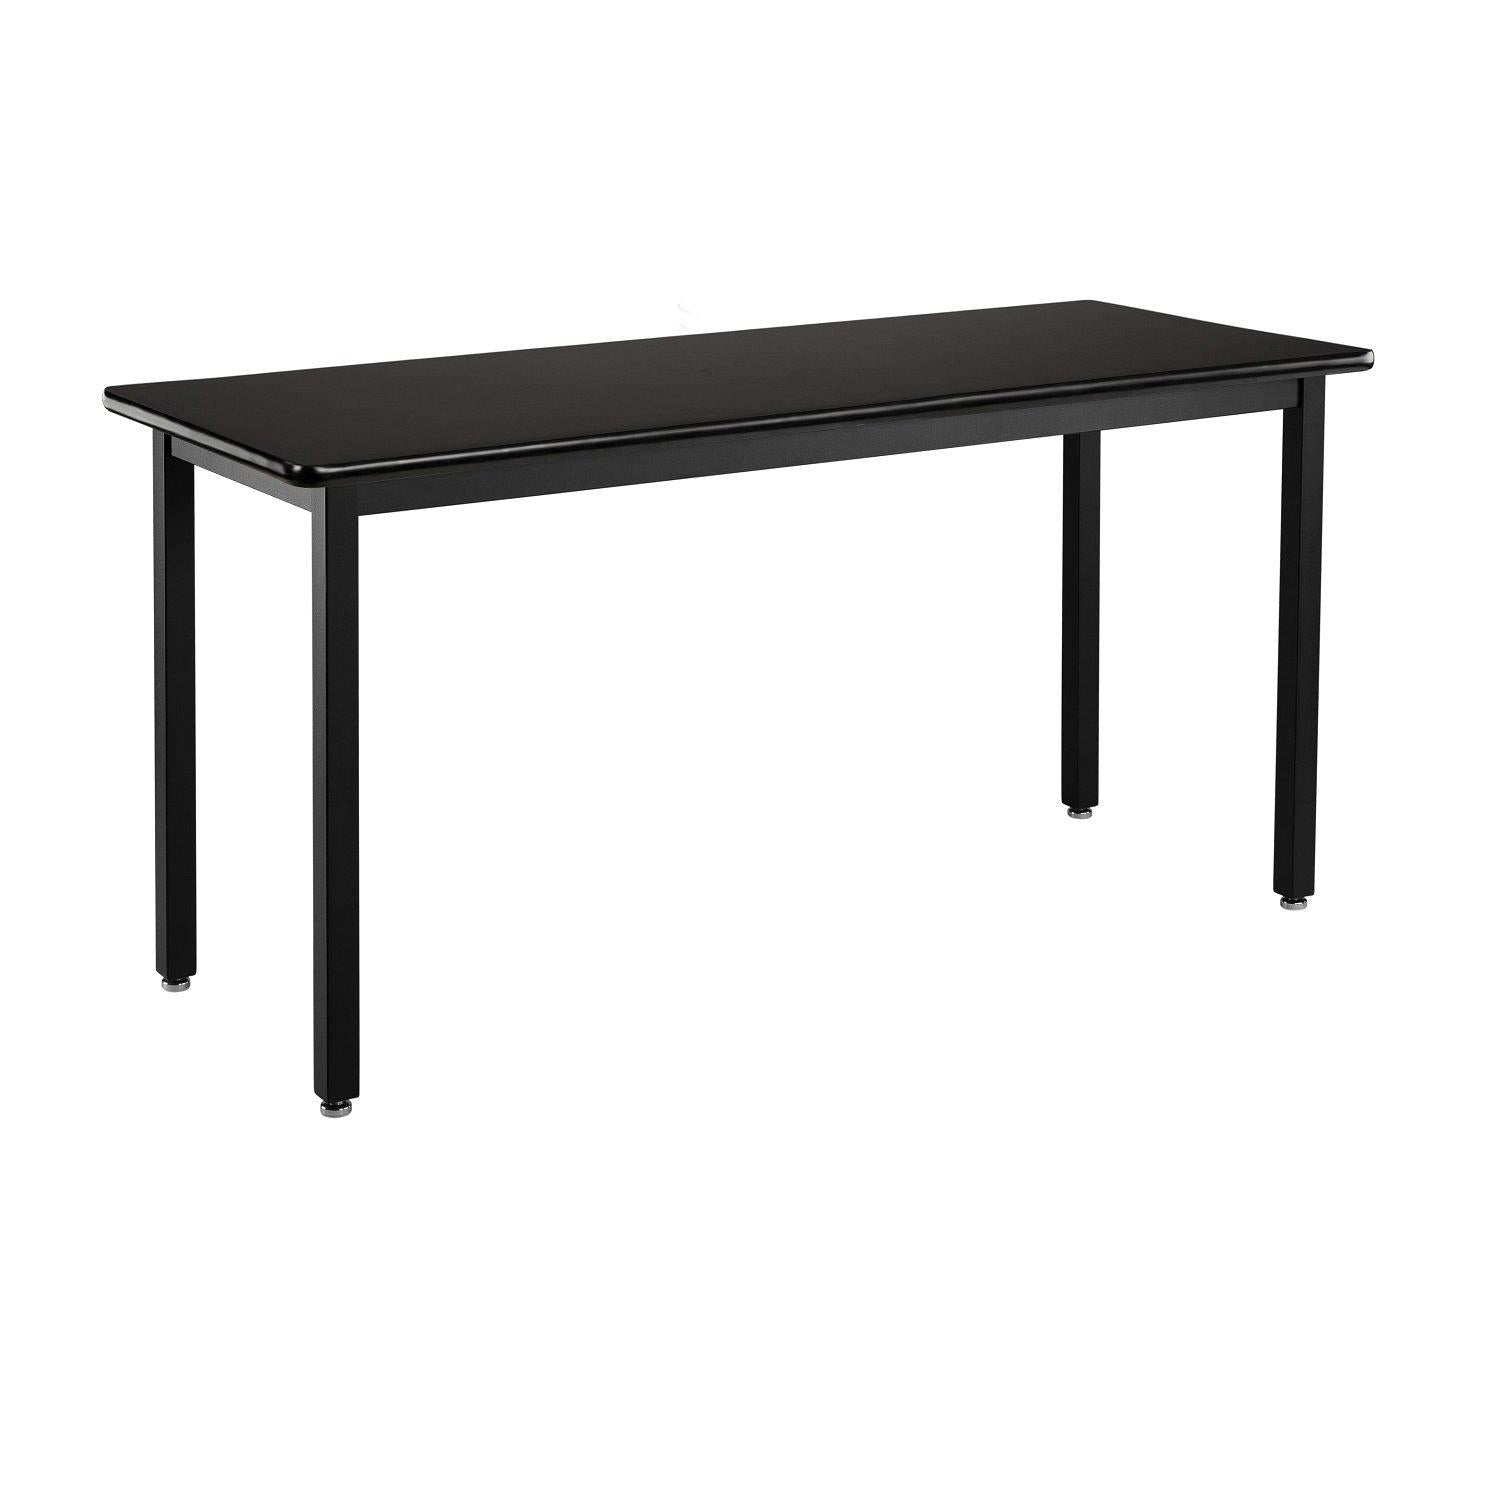 Heavy-Duty Fixed Height Utility Table, Black Frame, 24" x 54", High-Pressure Laminate Top with T-Mold Edge